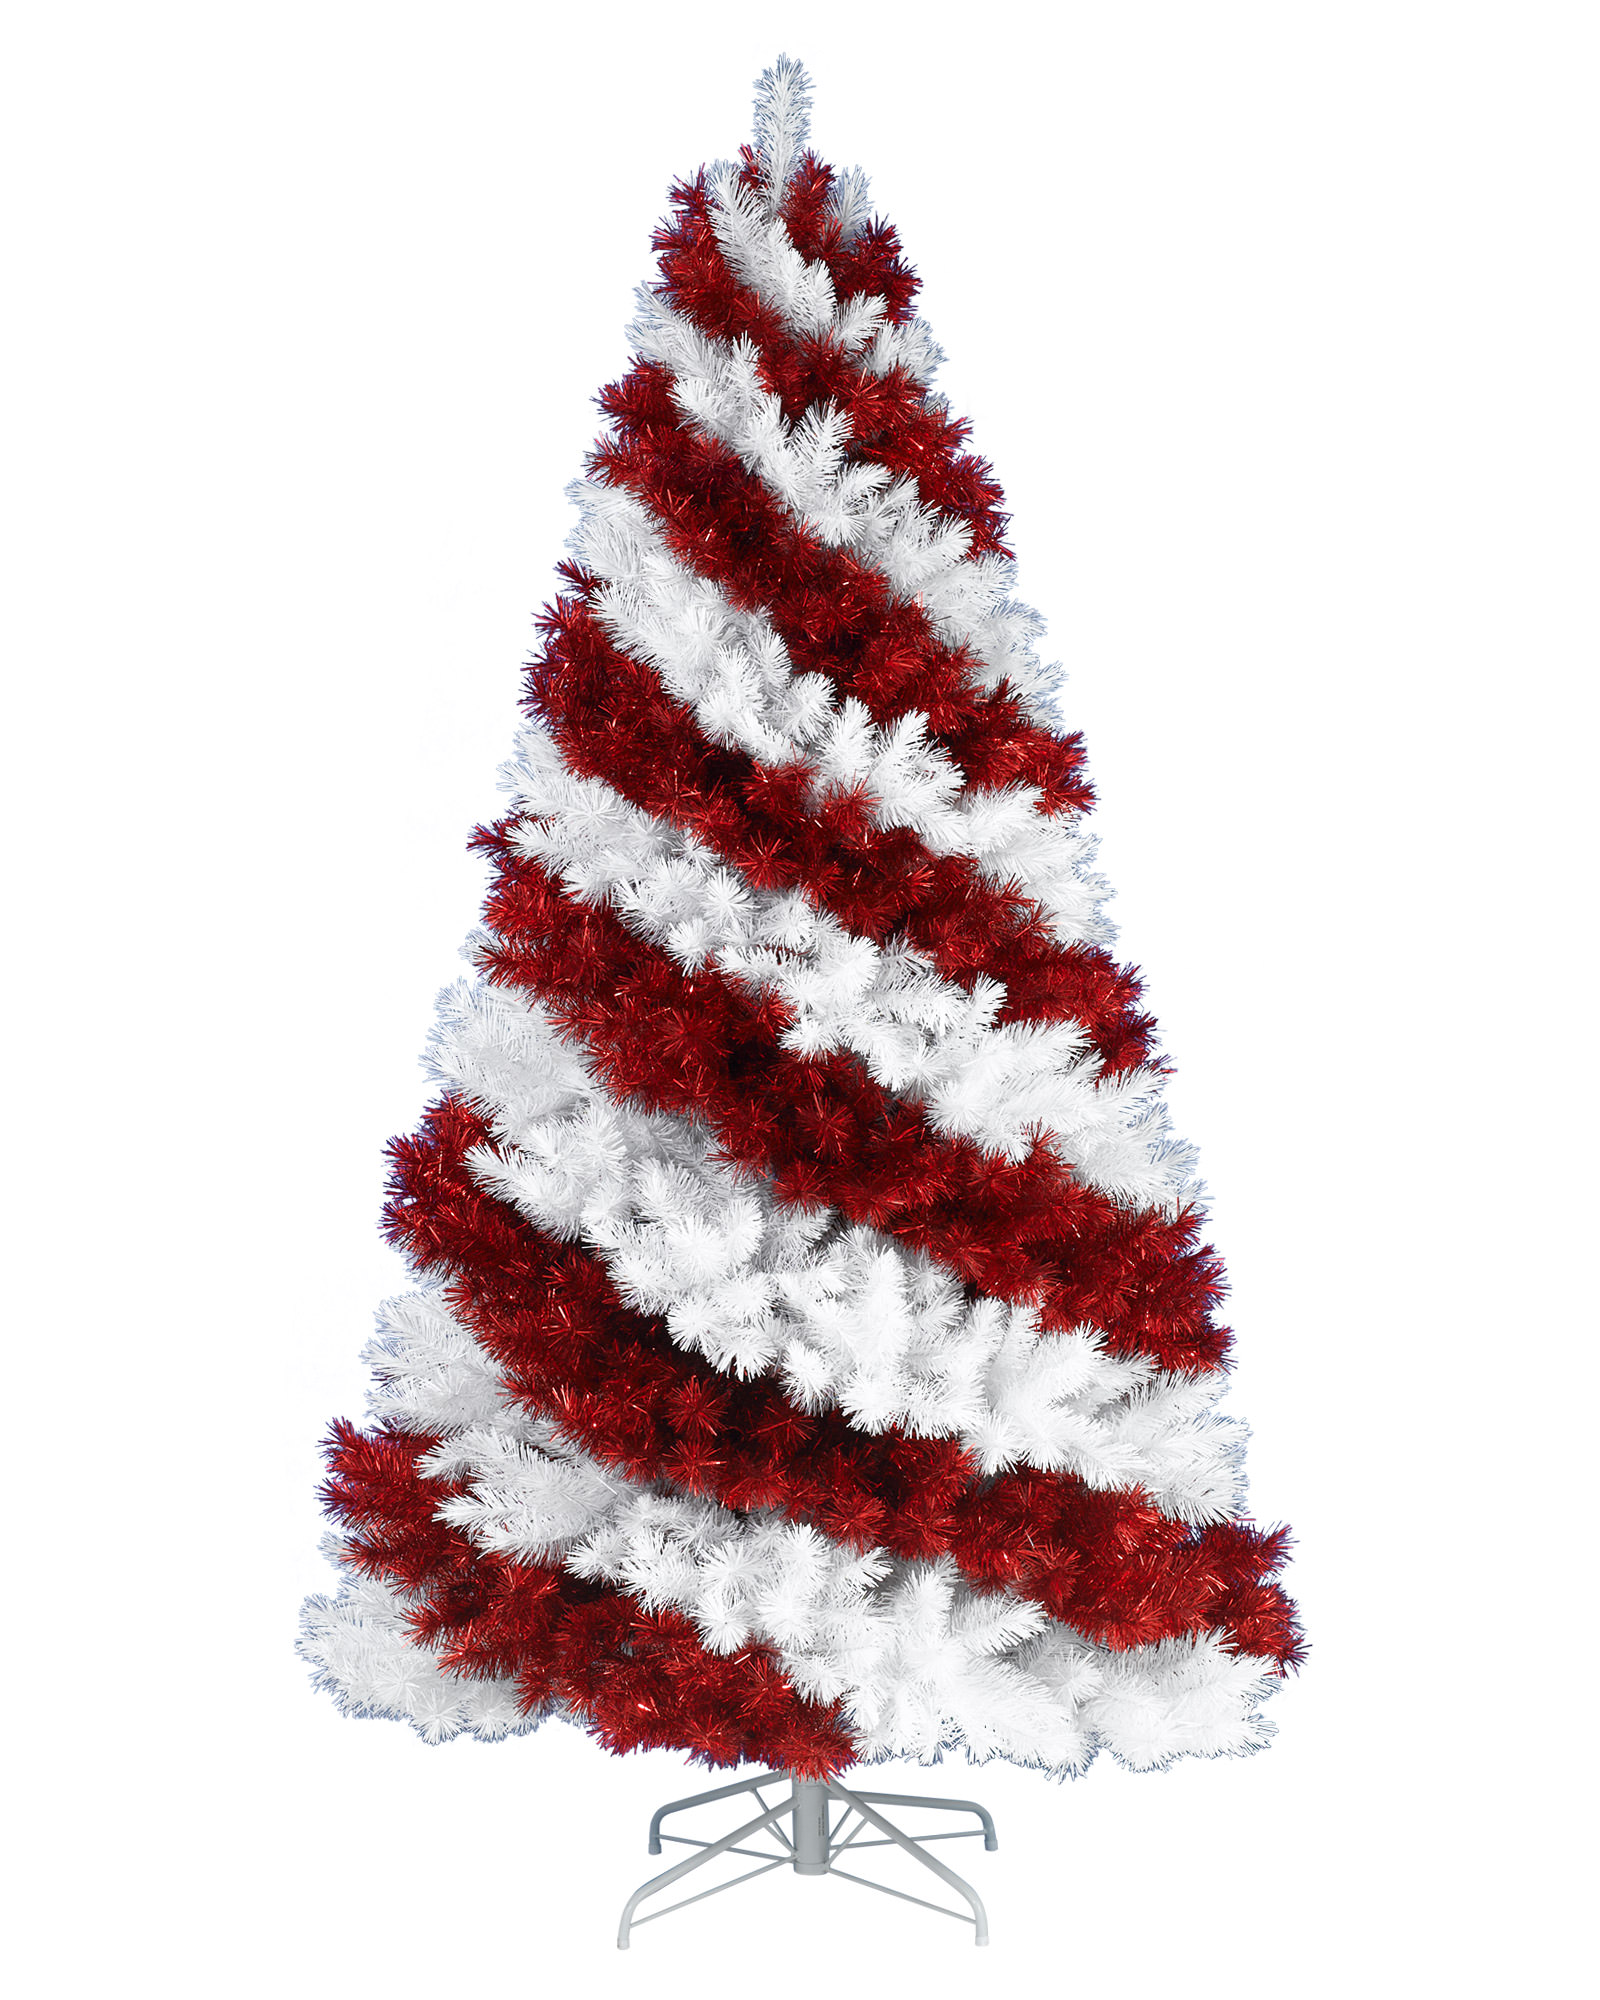 Candy Cane Christmas Trees Online | Treetopia